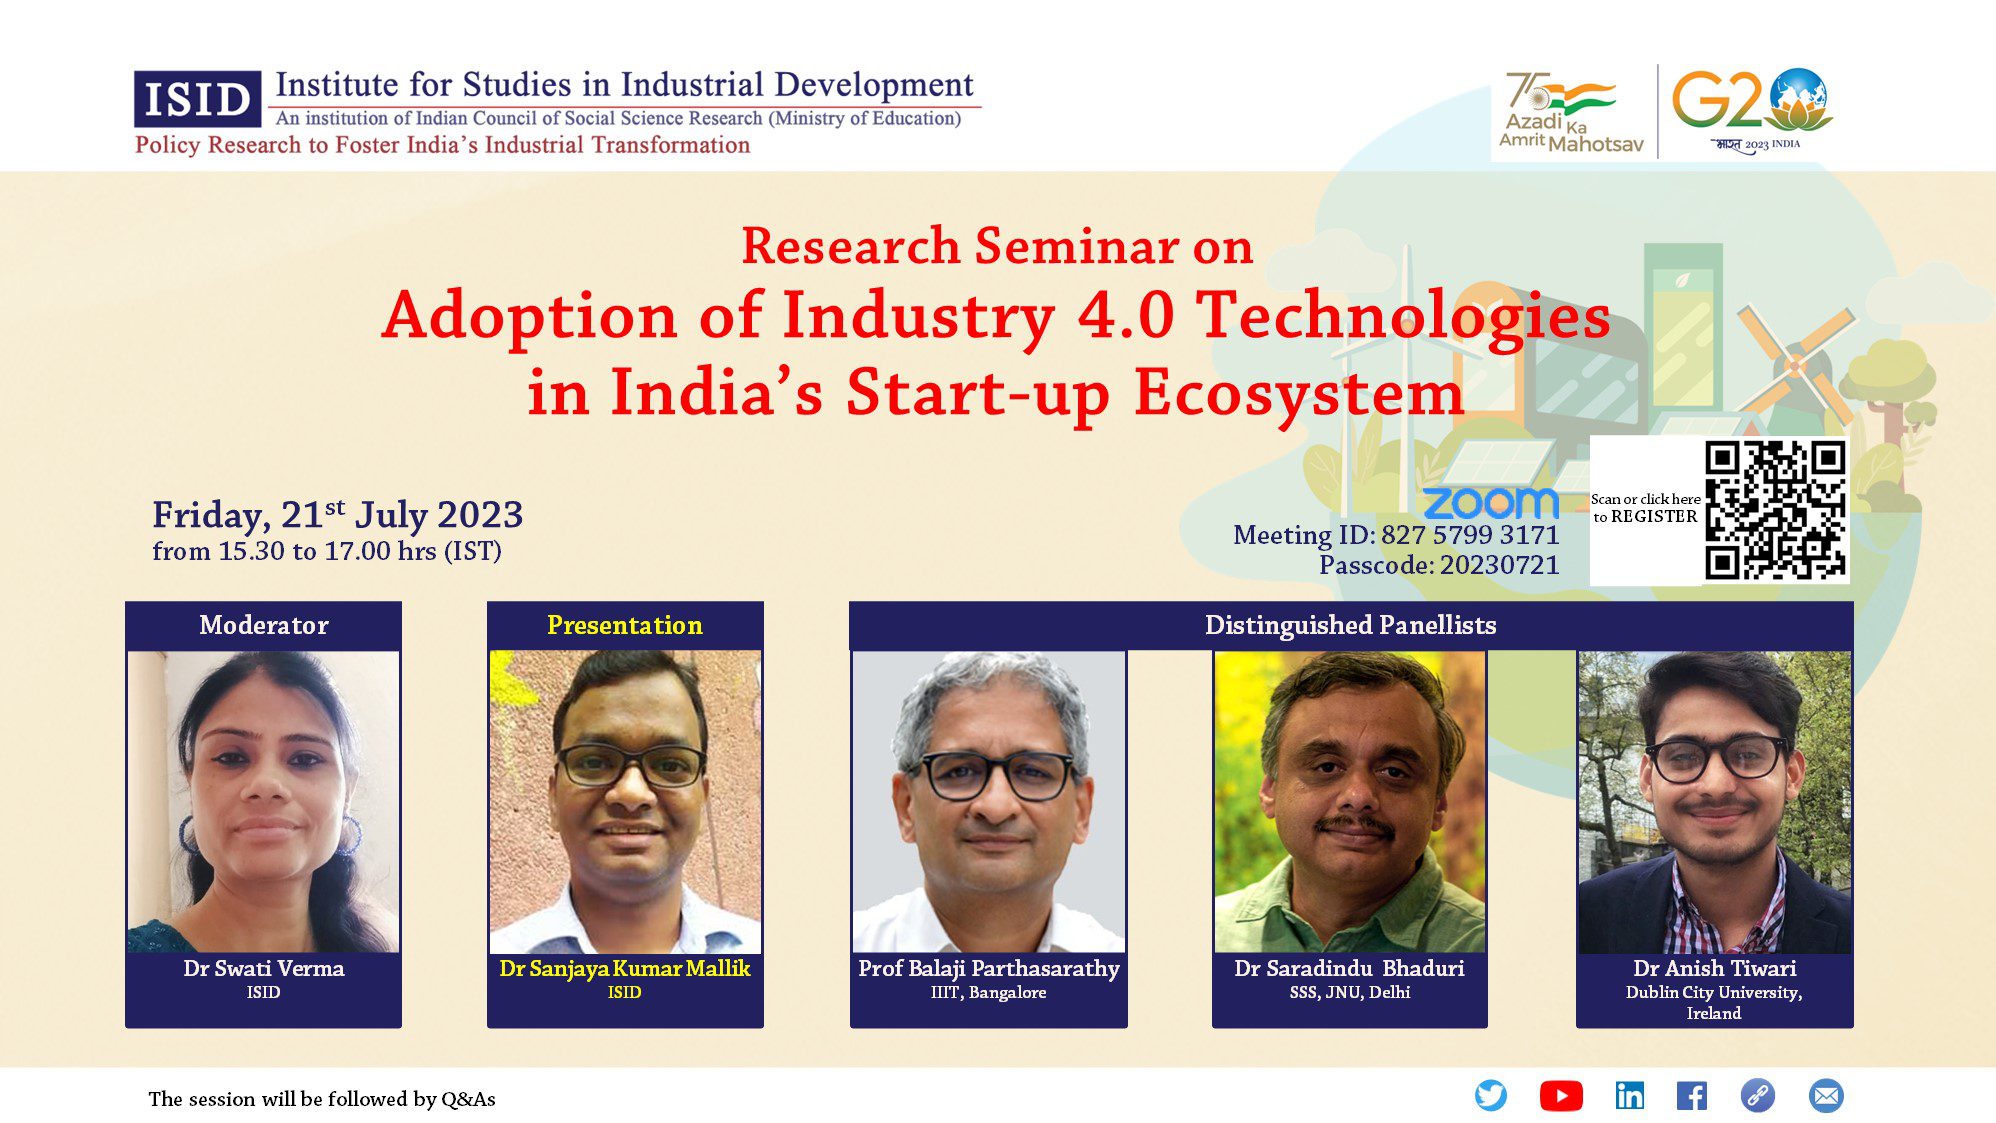 Research Seminar on Adoption of Industry 4.0 Technologies in India’s Start-up Ecosystem